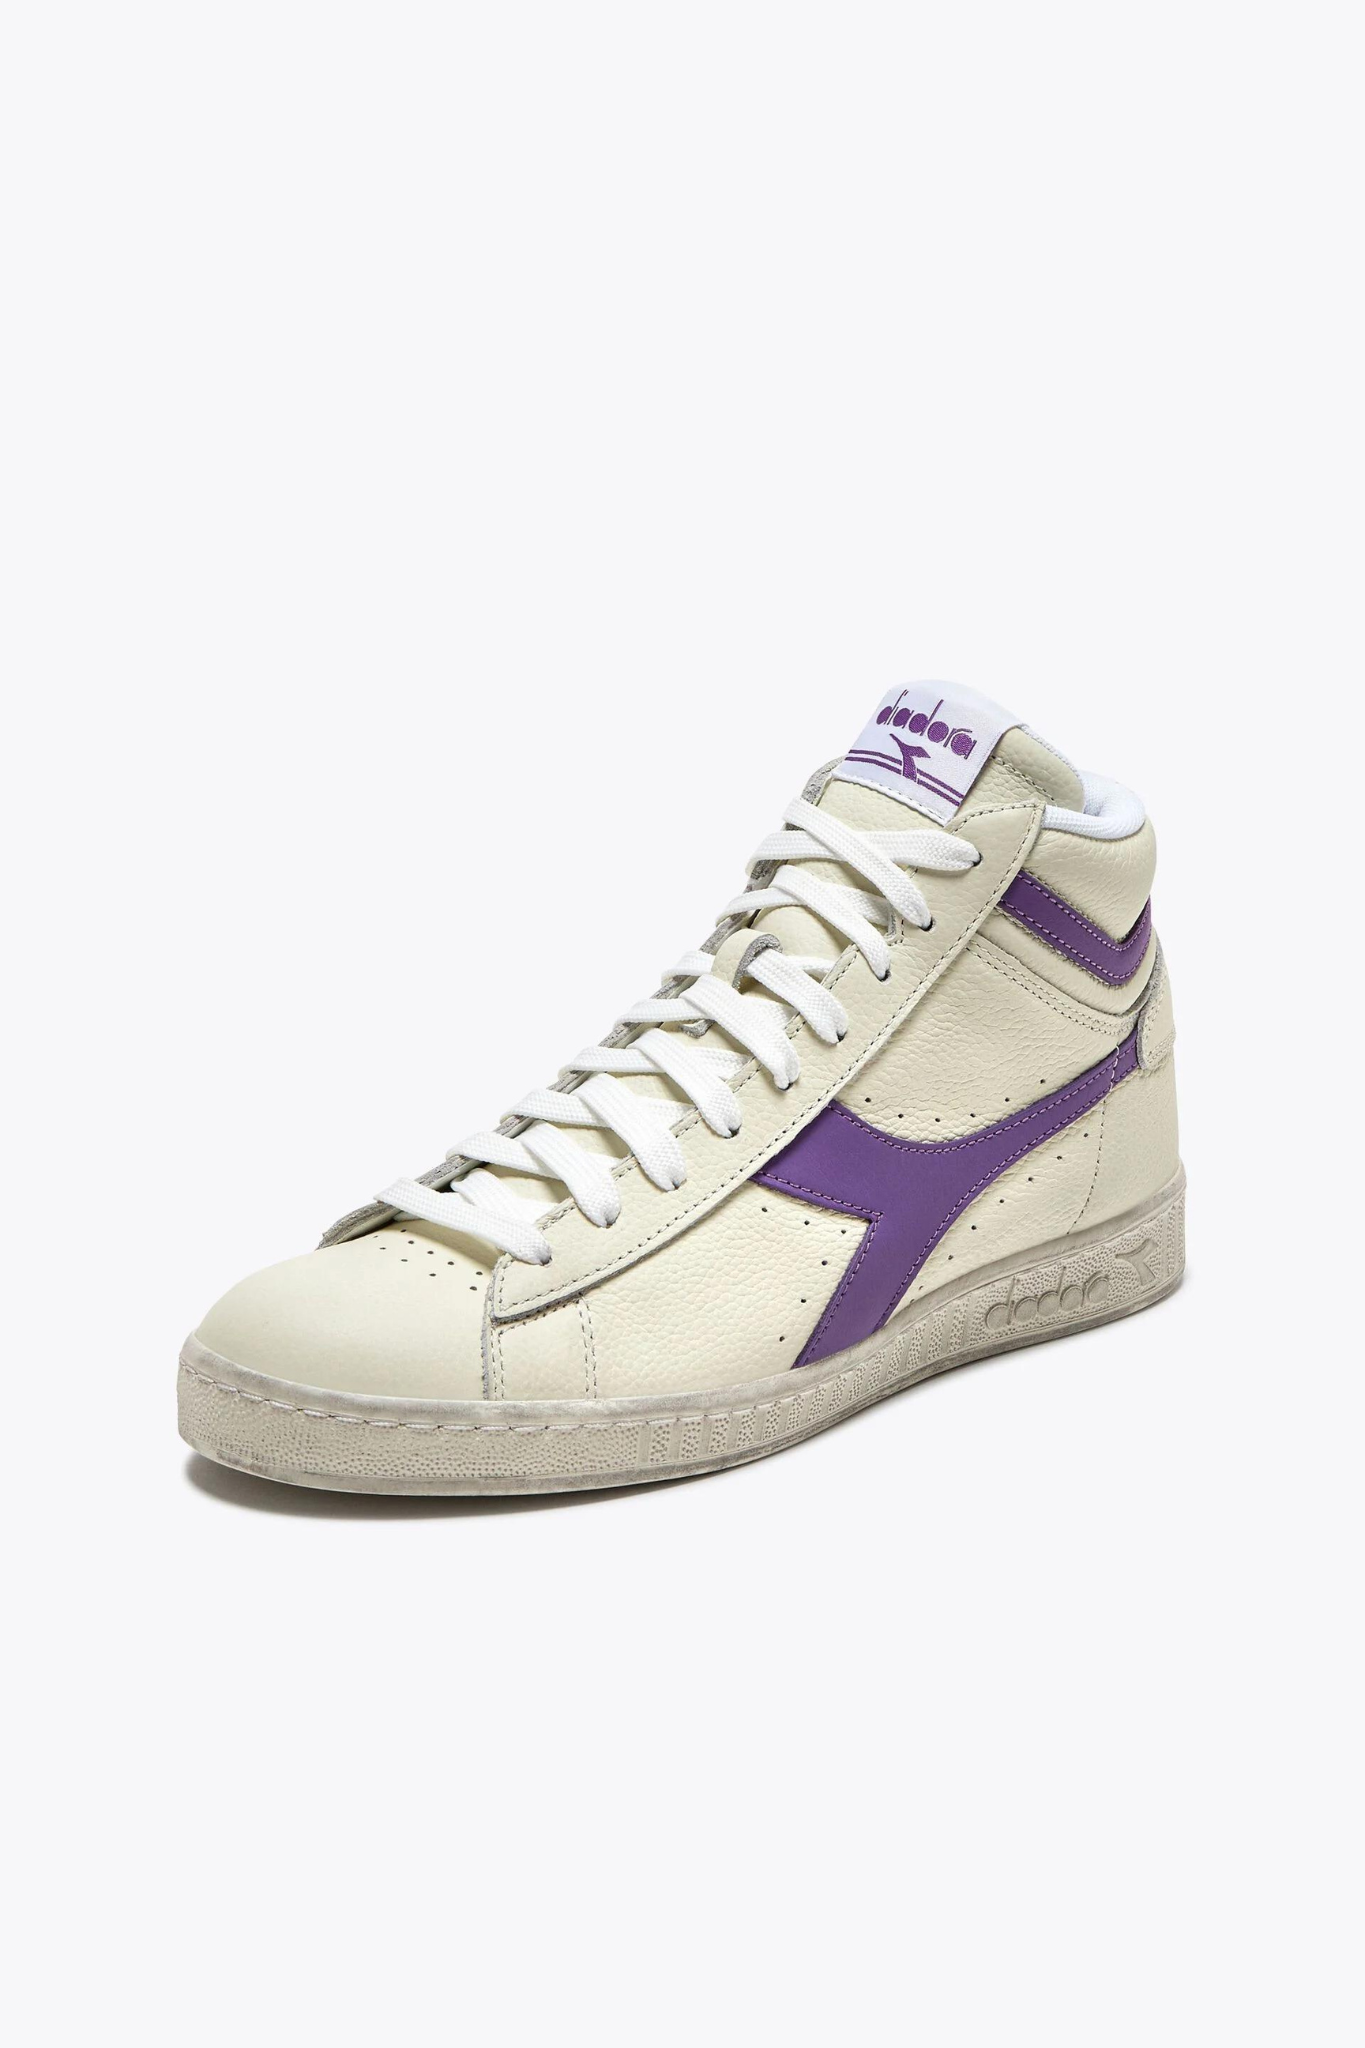 GAME L HIGH WAXED SNEAKER - WHITE/VIOLET BERRY